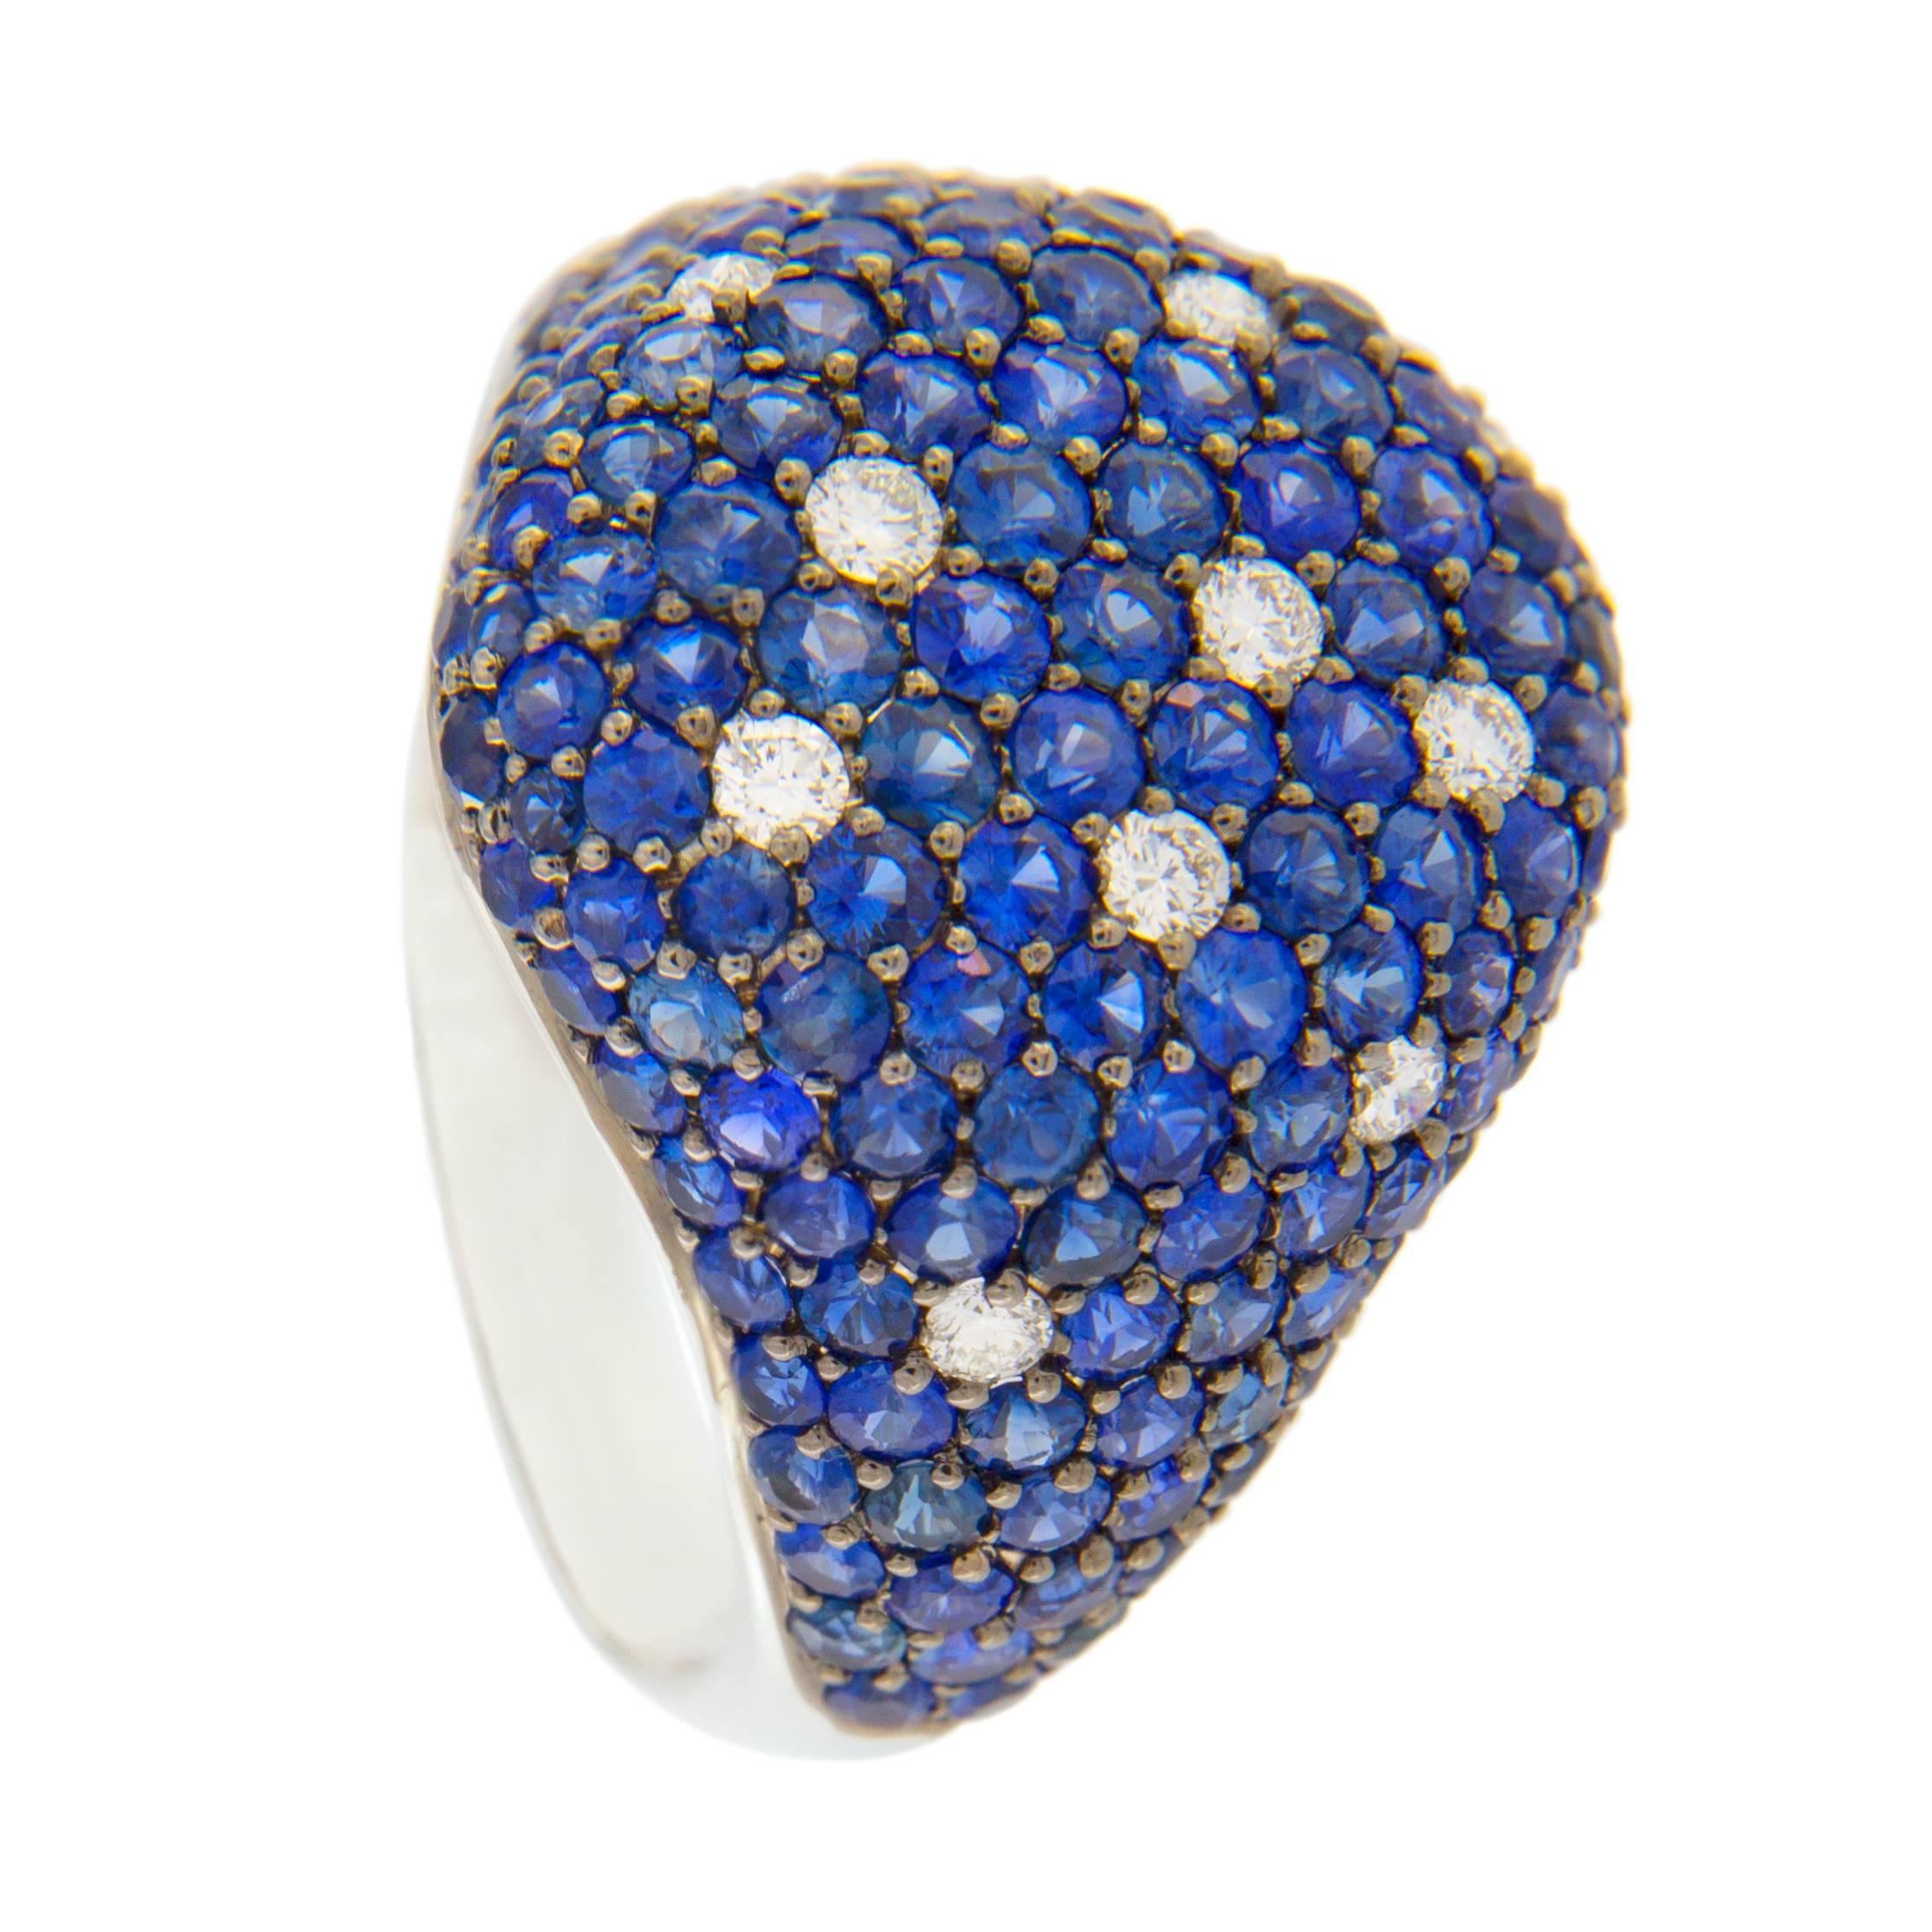 Alex Jona design collection, hand crafted in Italy, 18 karat white gold blue sapphire & white diamond pavé signet ring featuring 3.81 carats of Blue Sapphires and 0.24 carats of white diamonds, F color, VVS1 clarity. Can also be worn as Pinkie